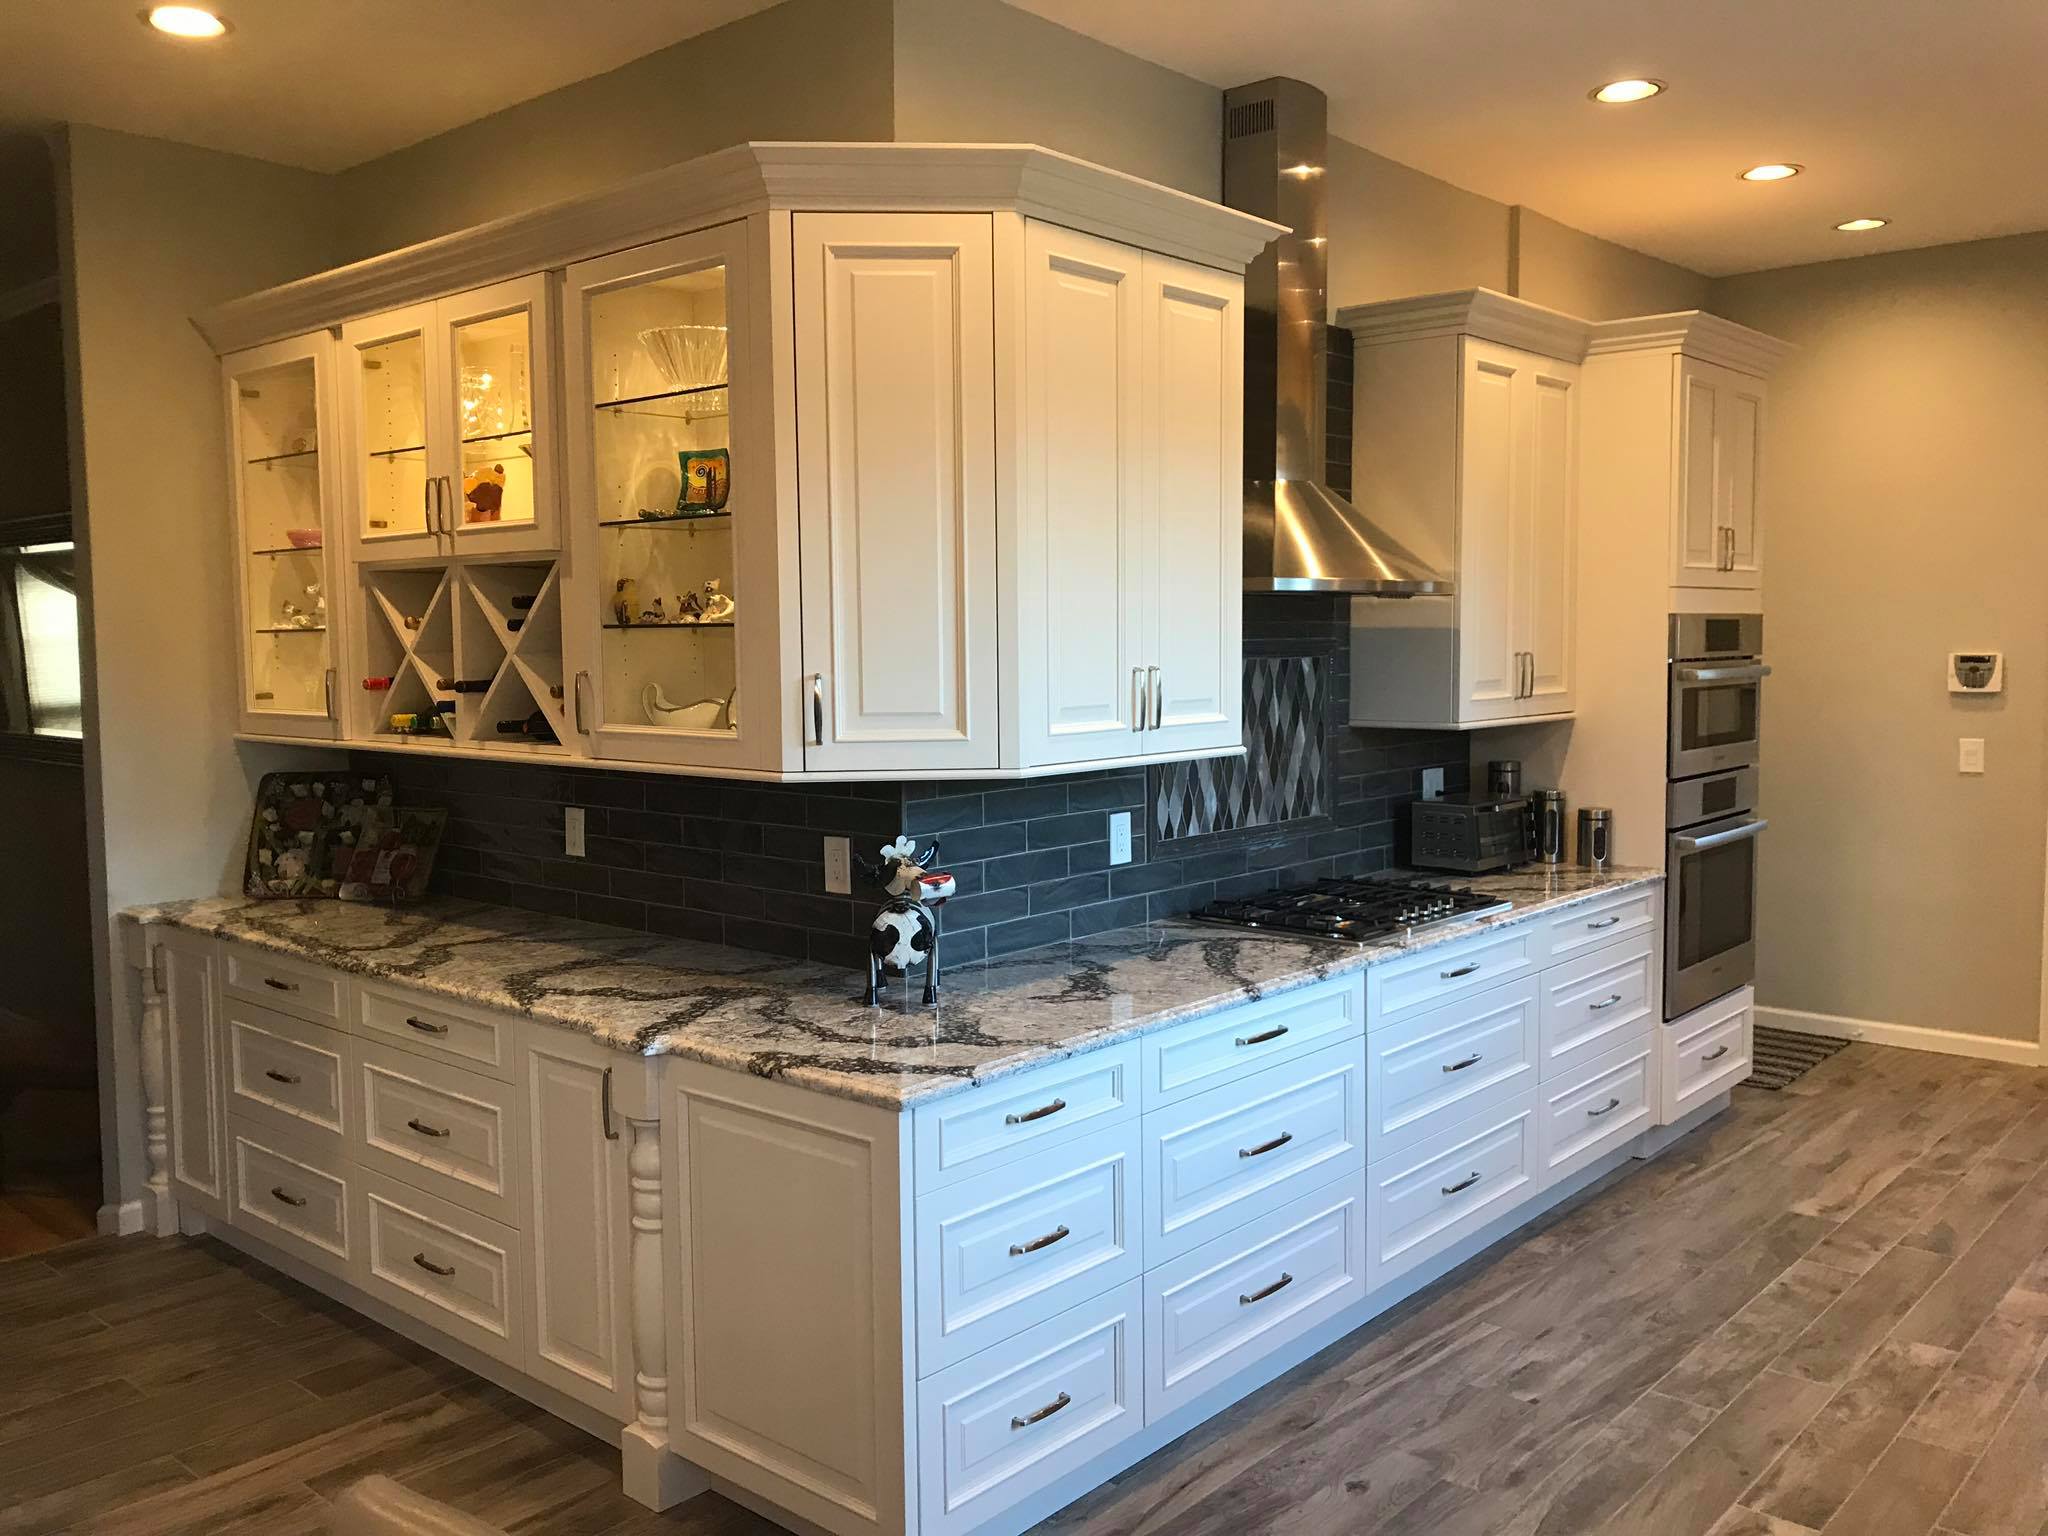 Design Kitchen in Long Island | Remodeling Your Kitchen in Long Island